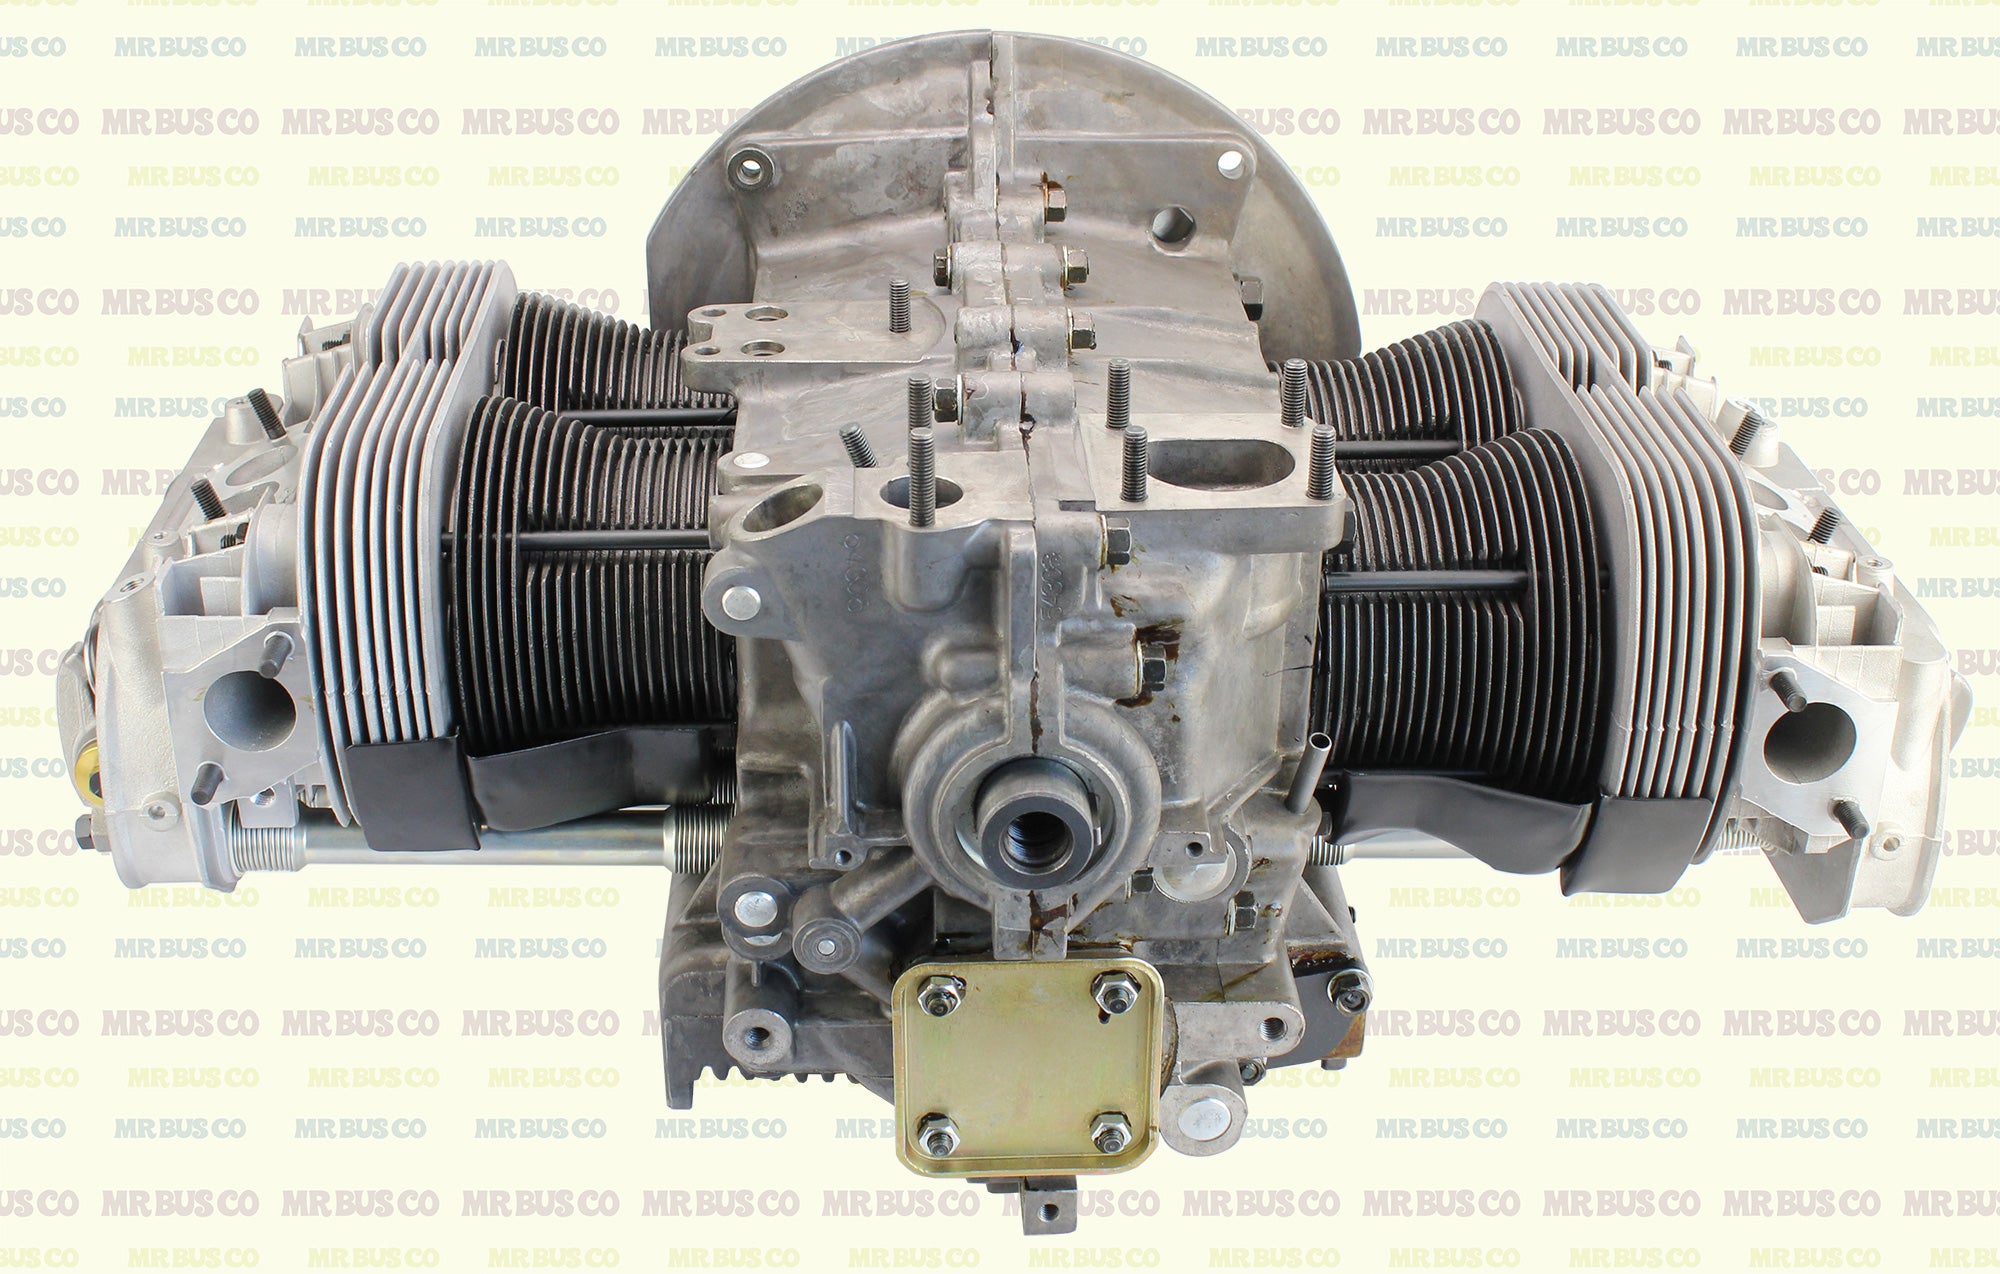 NEW 1776cc Dual Port Long Block Engine for Single Carb